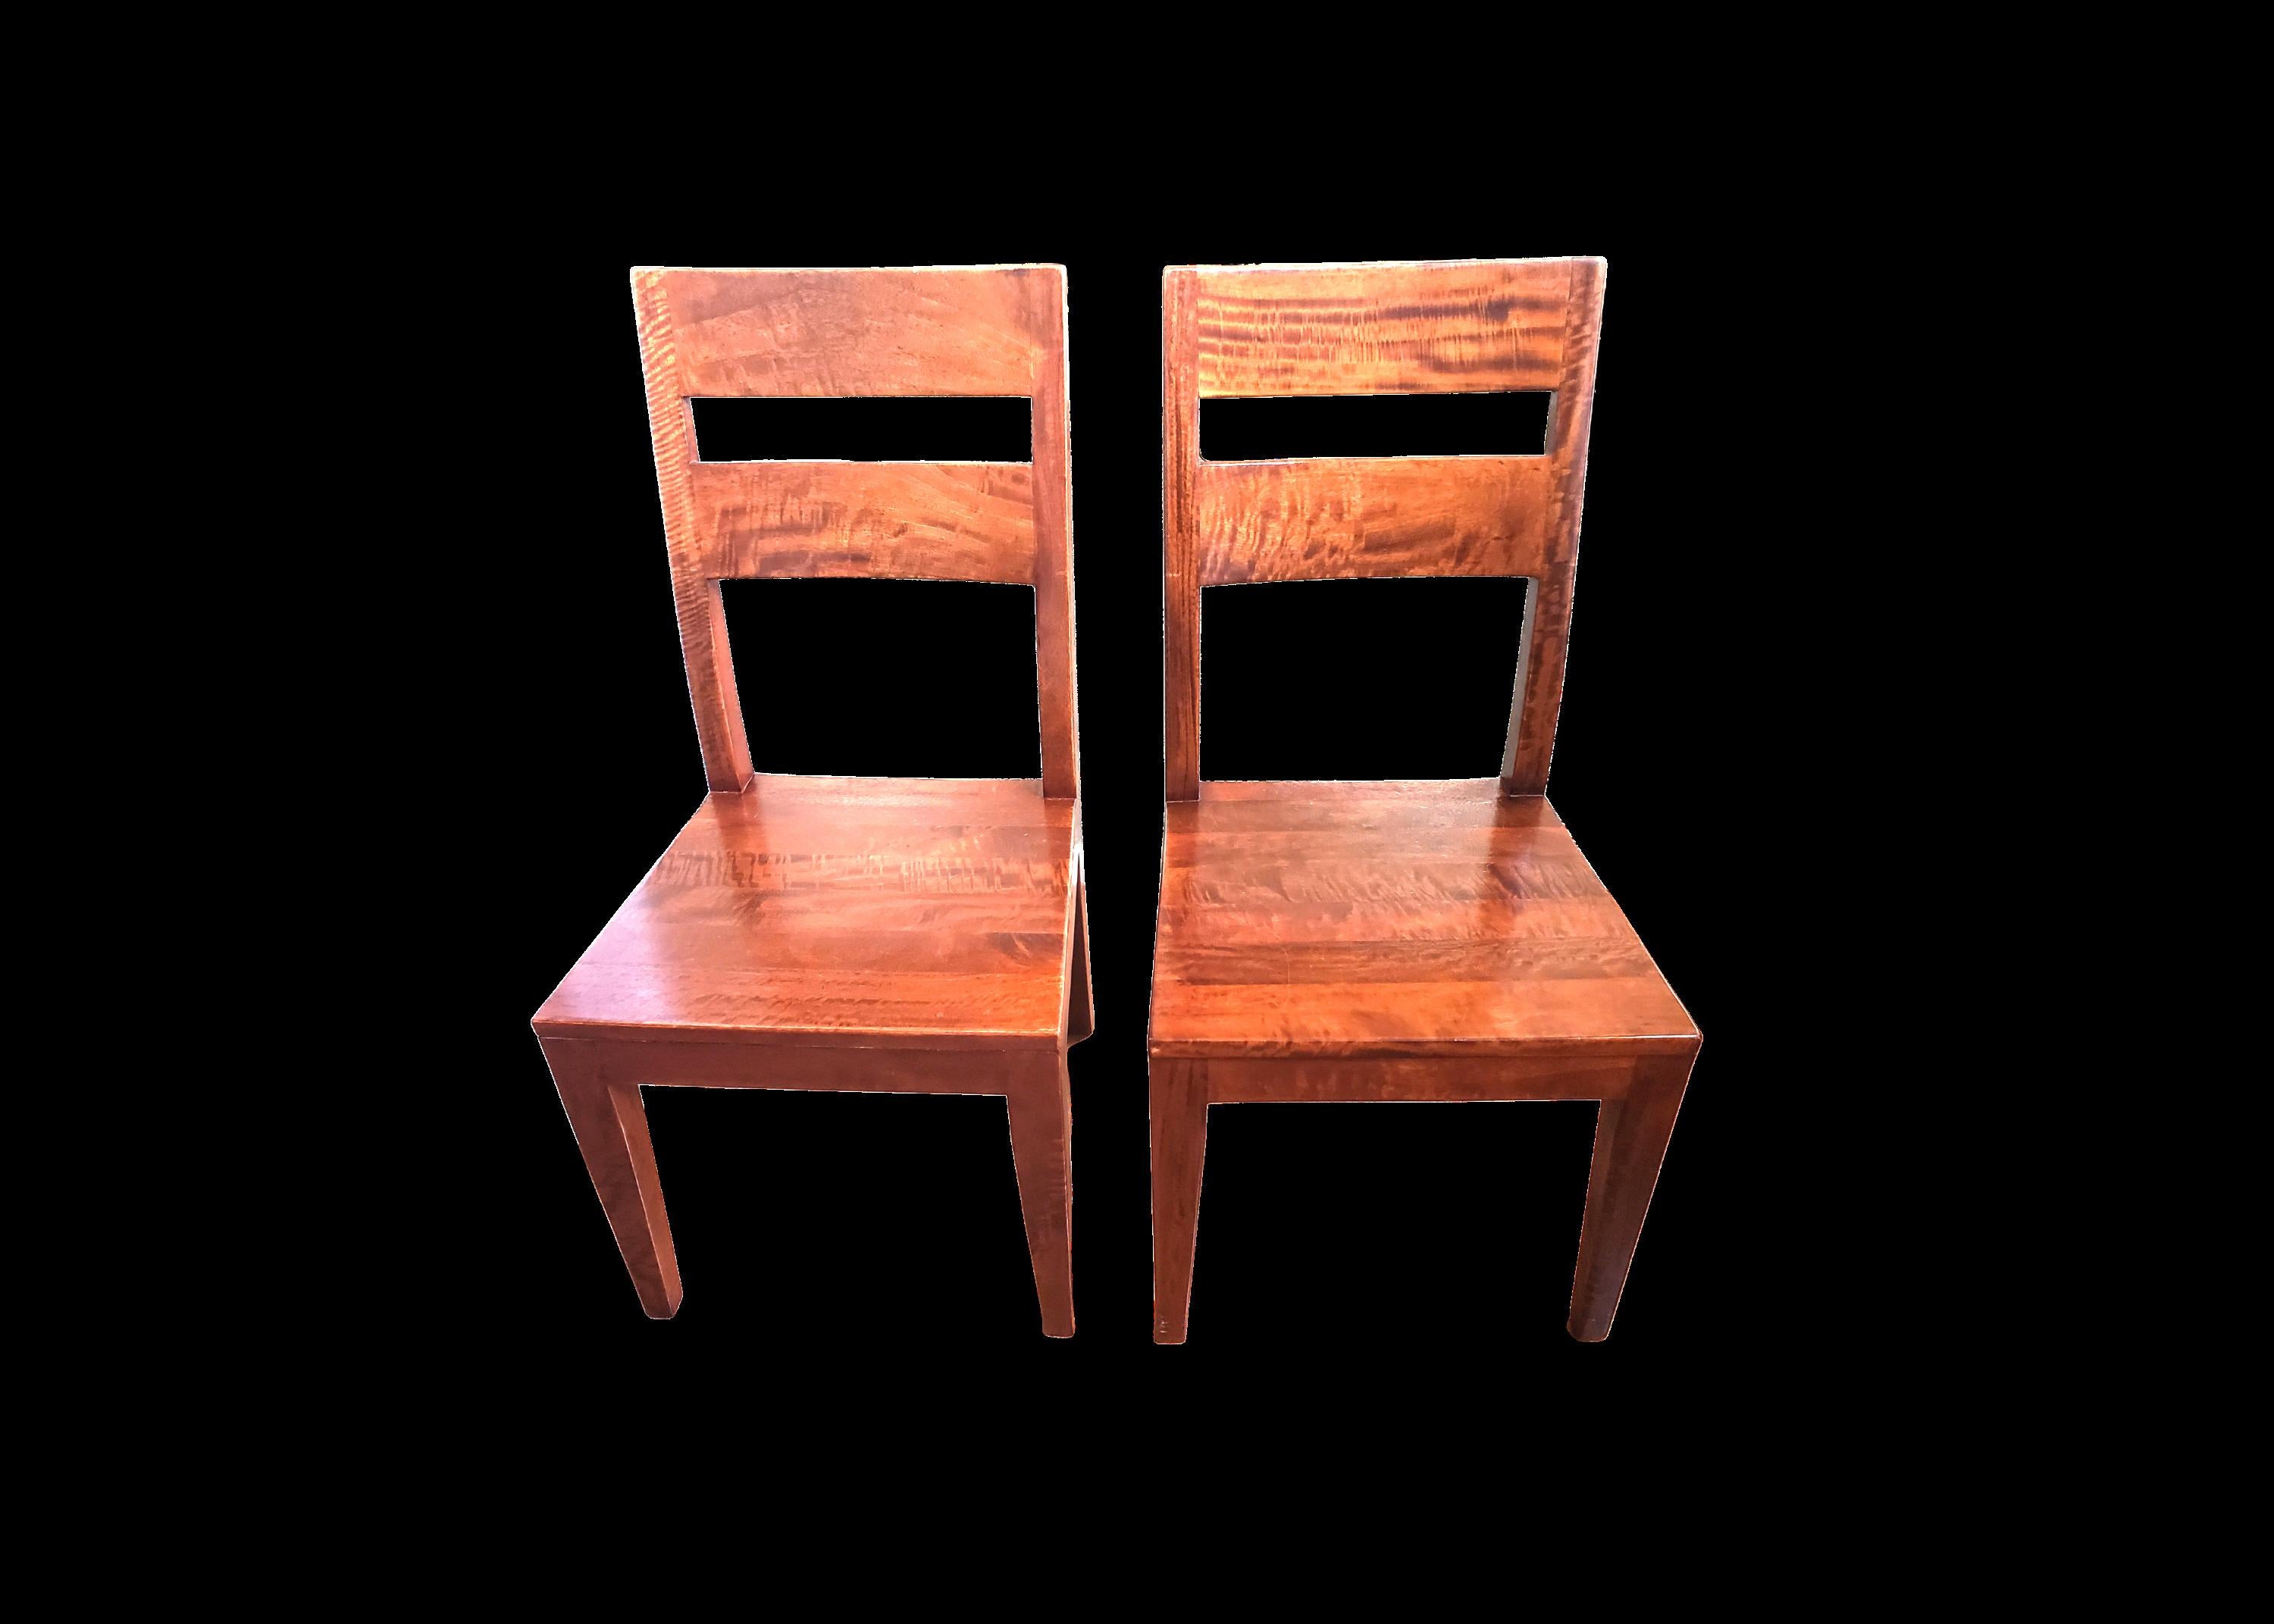 Vintage Splendid Solid Bubinga Wood Chairs, a Pair For Sale 2